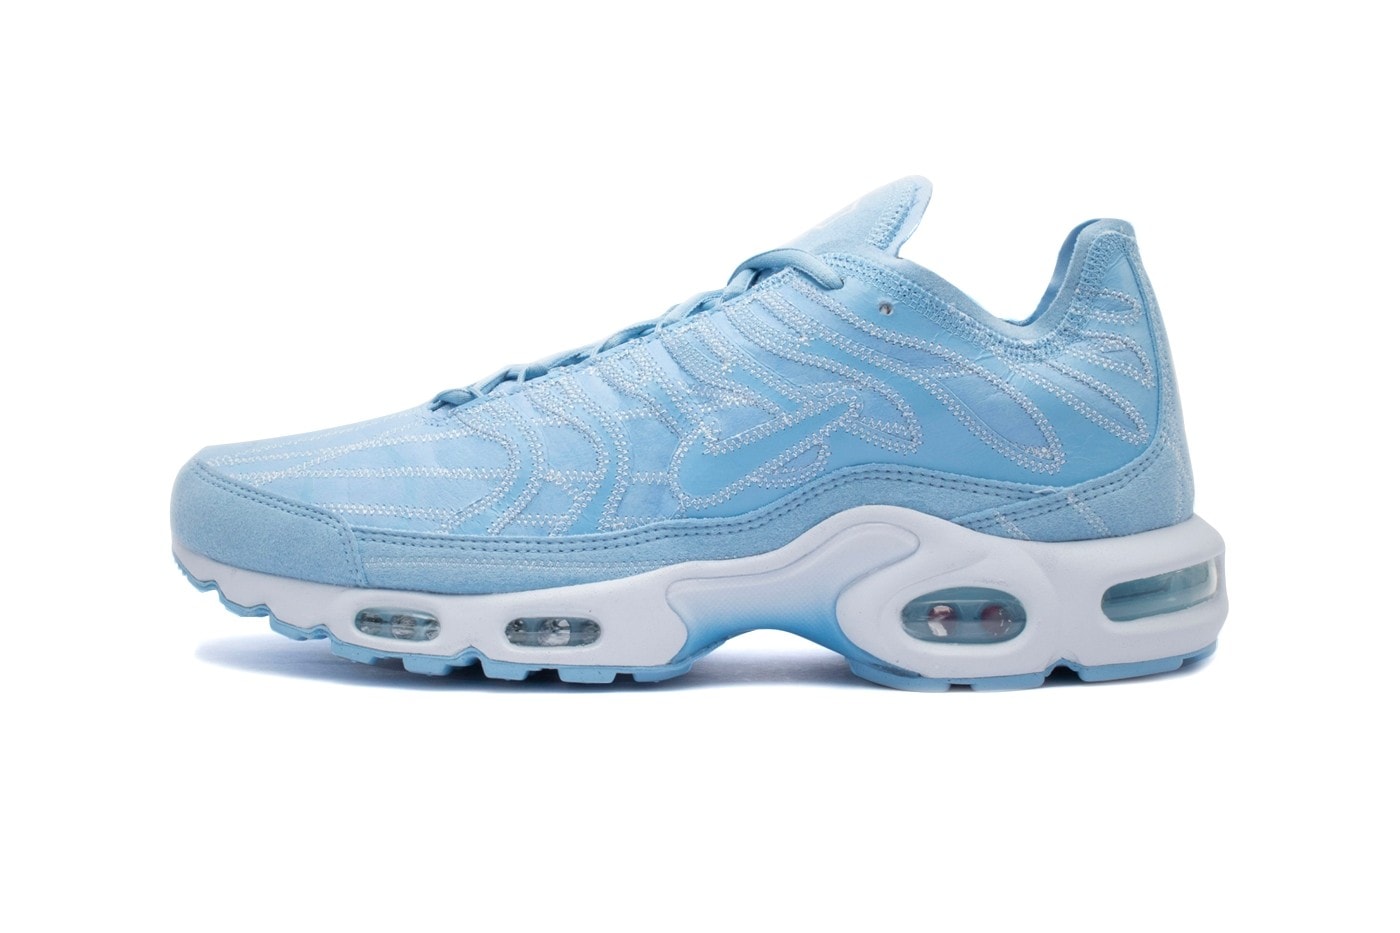 Nike Air Max Plus Deconstructed Psychic Blue